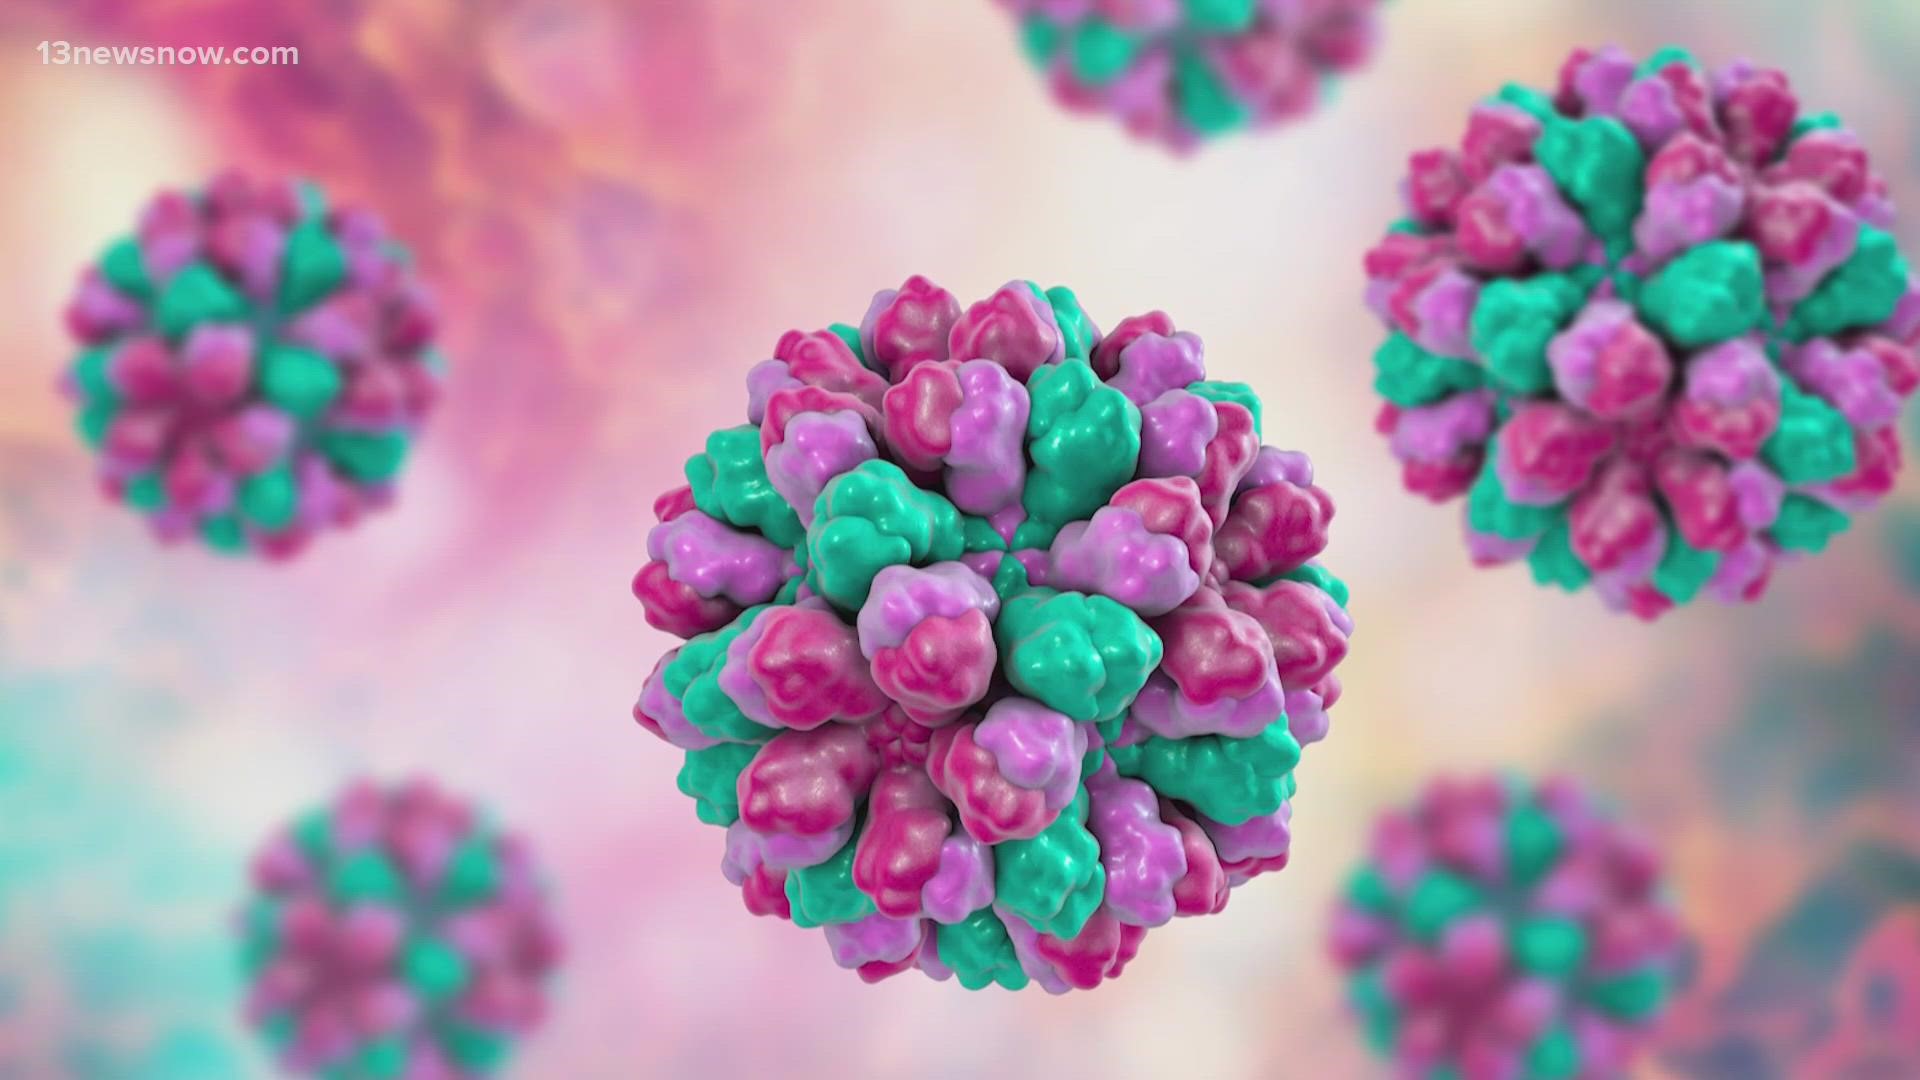 Norovirus can cause major stomach problems for anyone infected.